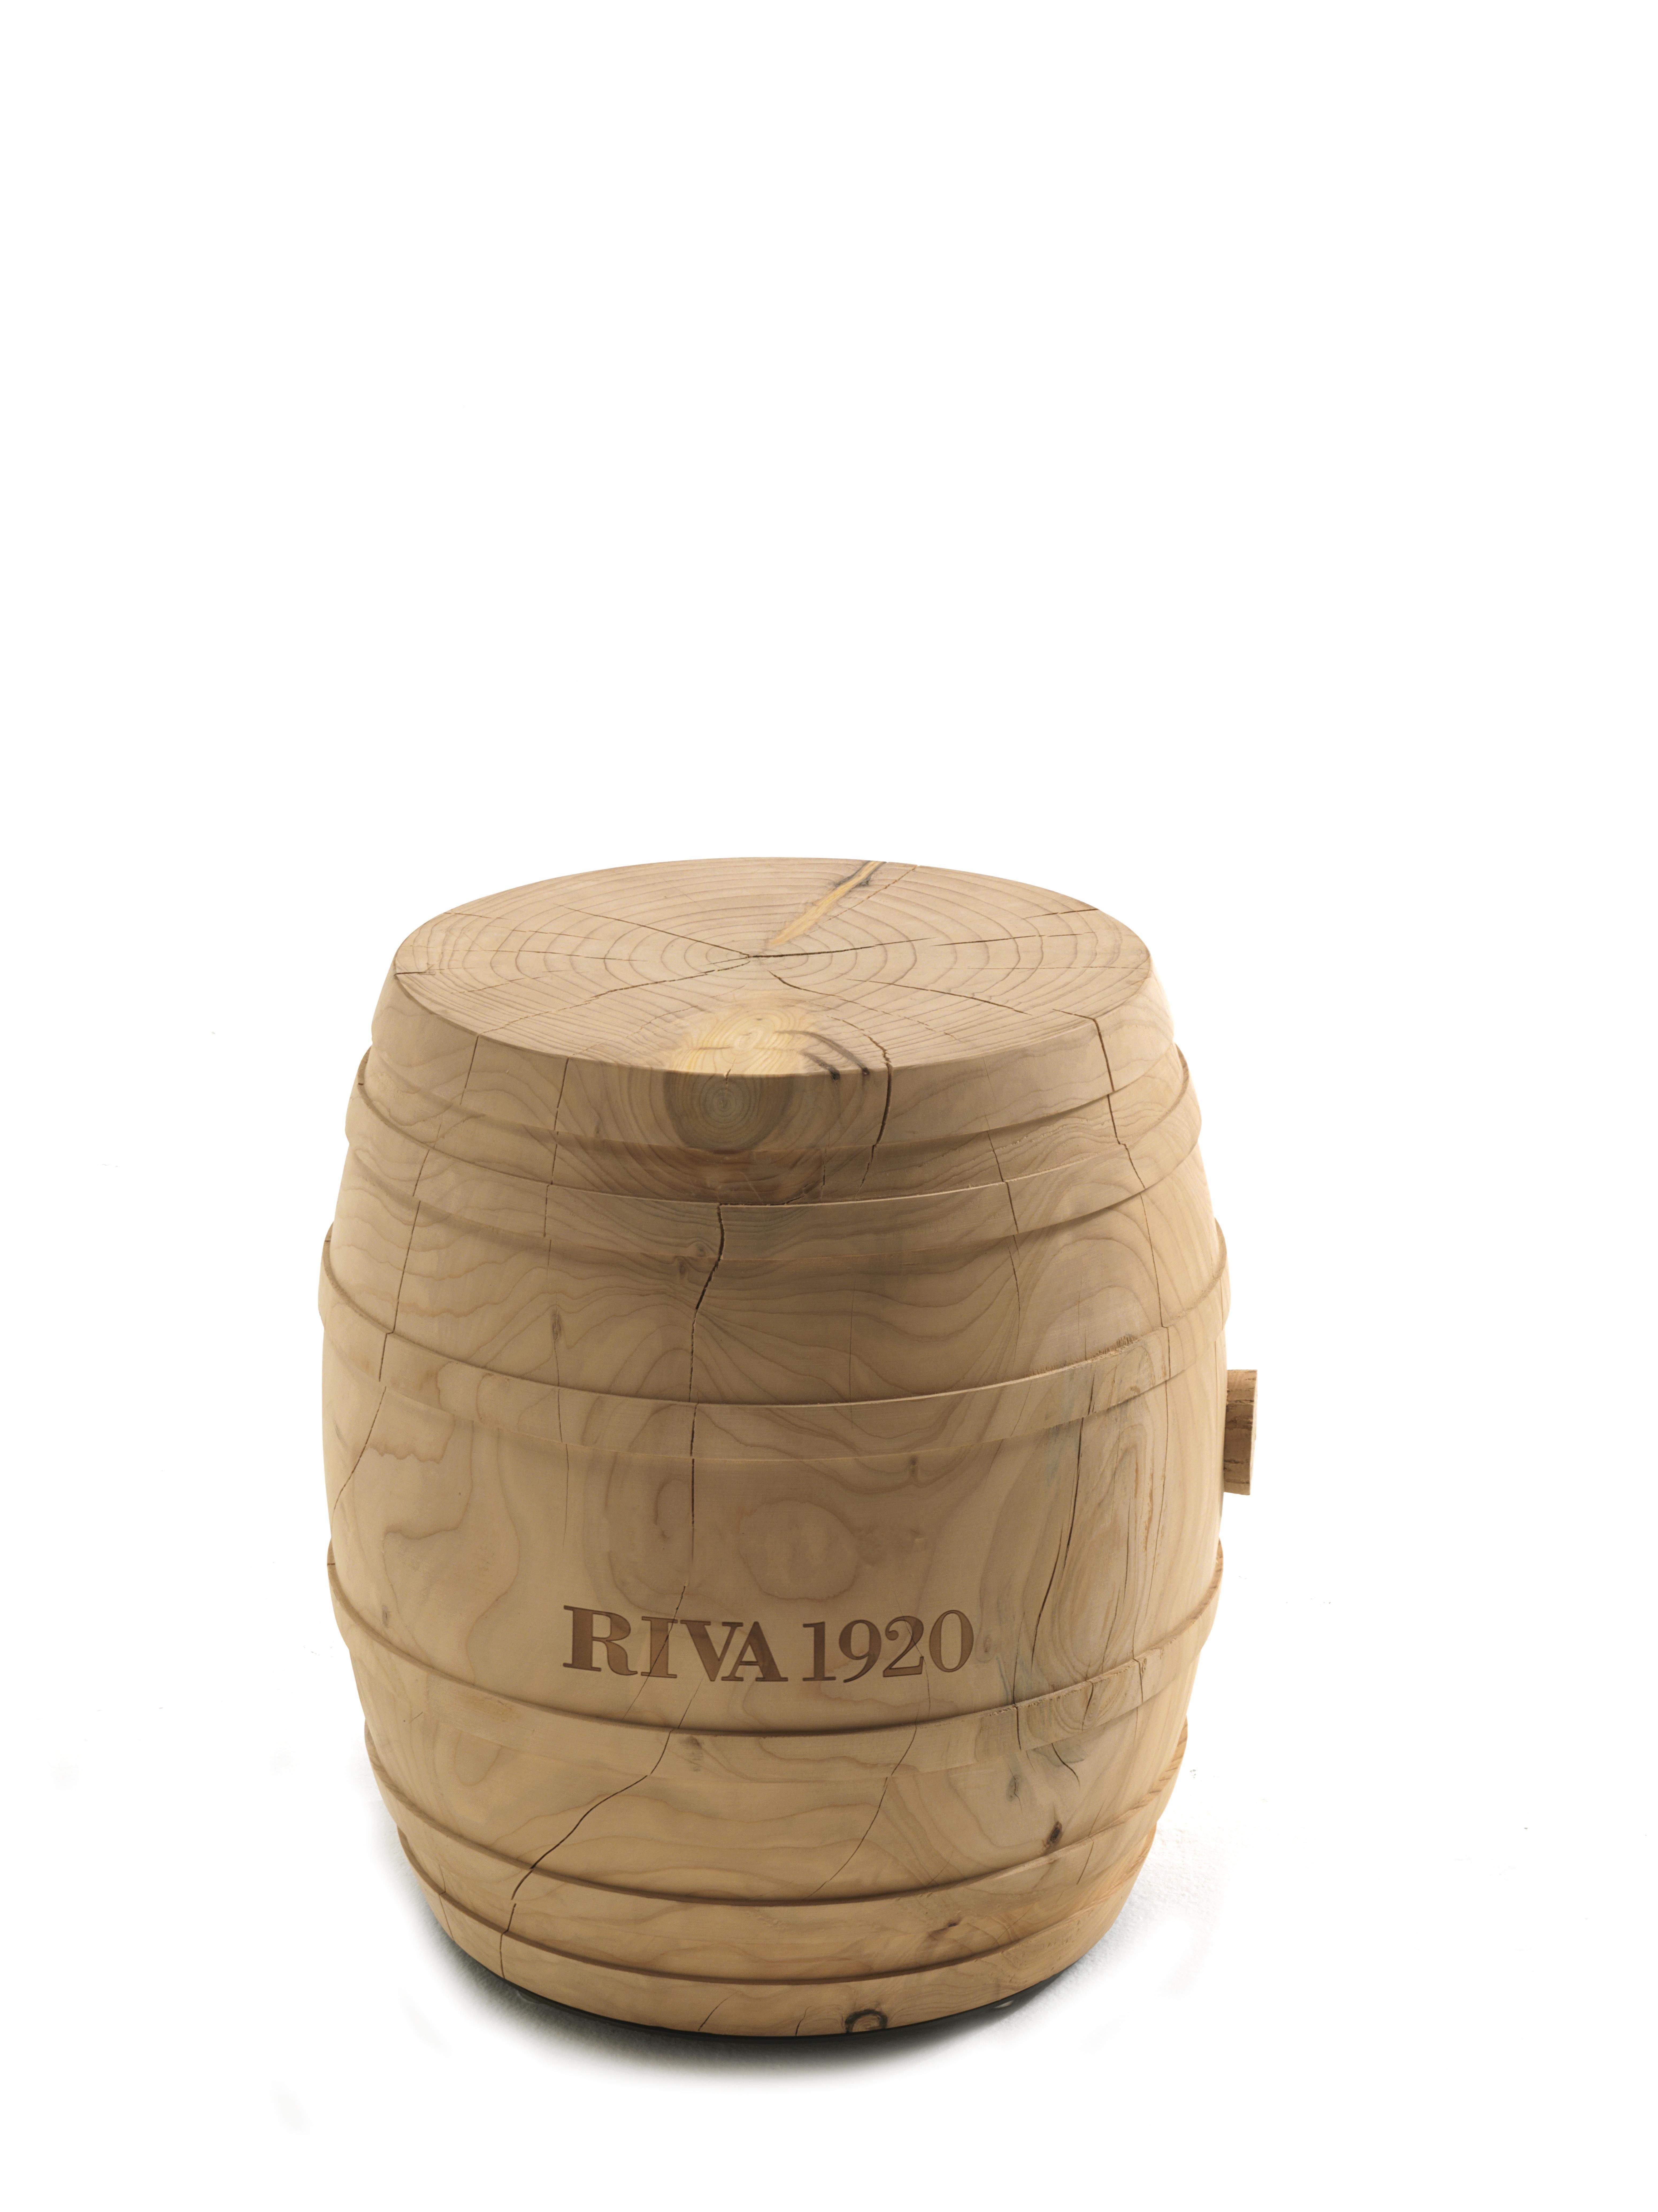 Botte Stool C.R.&S. Riva1920 Contemporary Natural Cedar Made in Italy Riva1920 For Sale